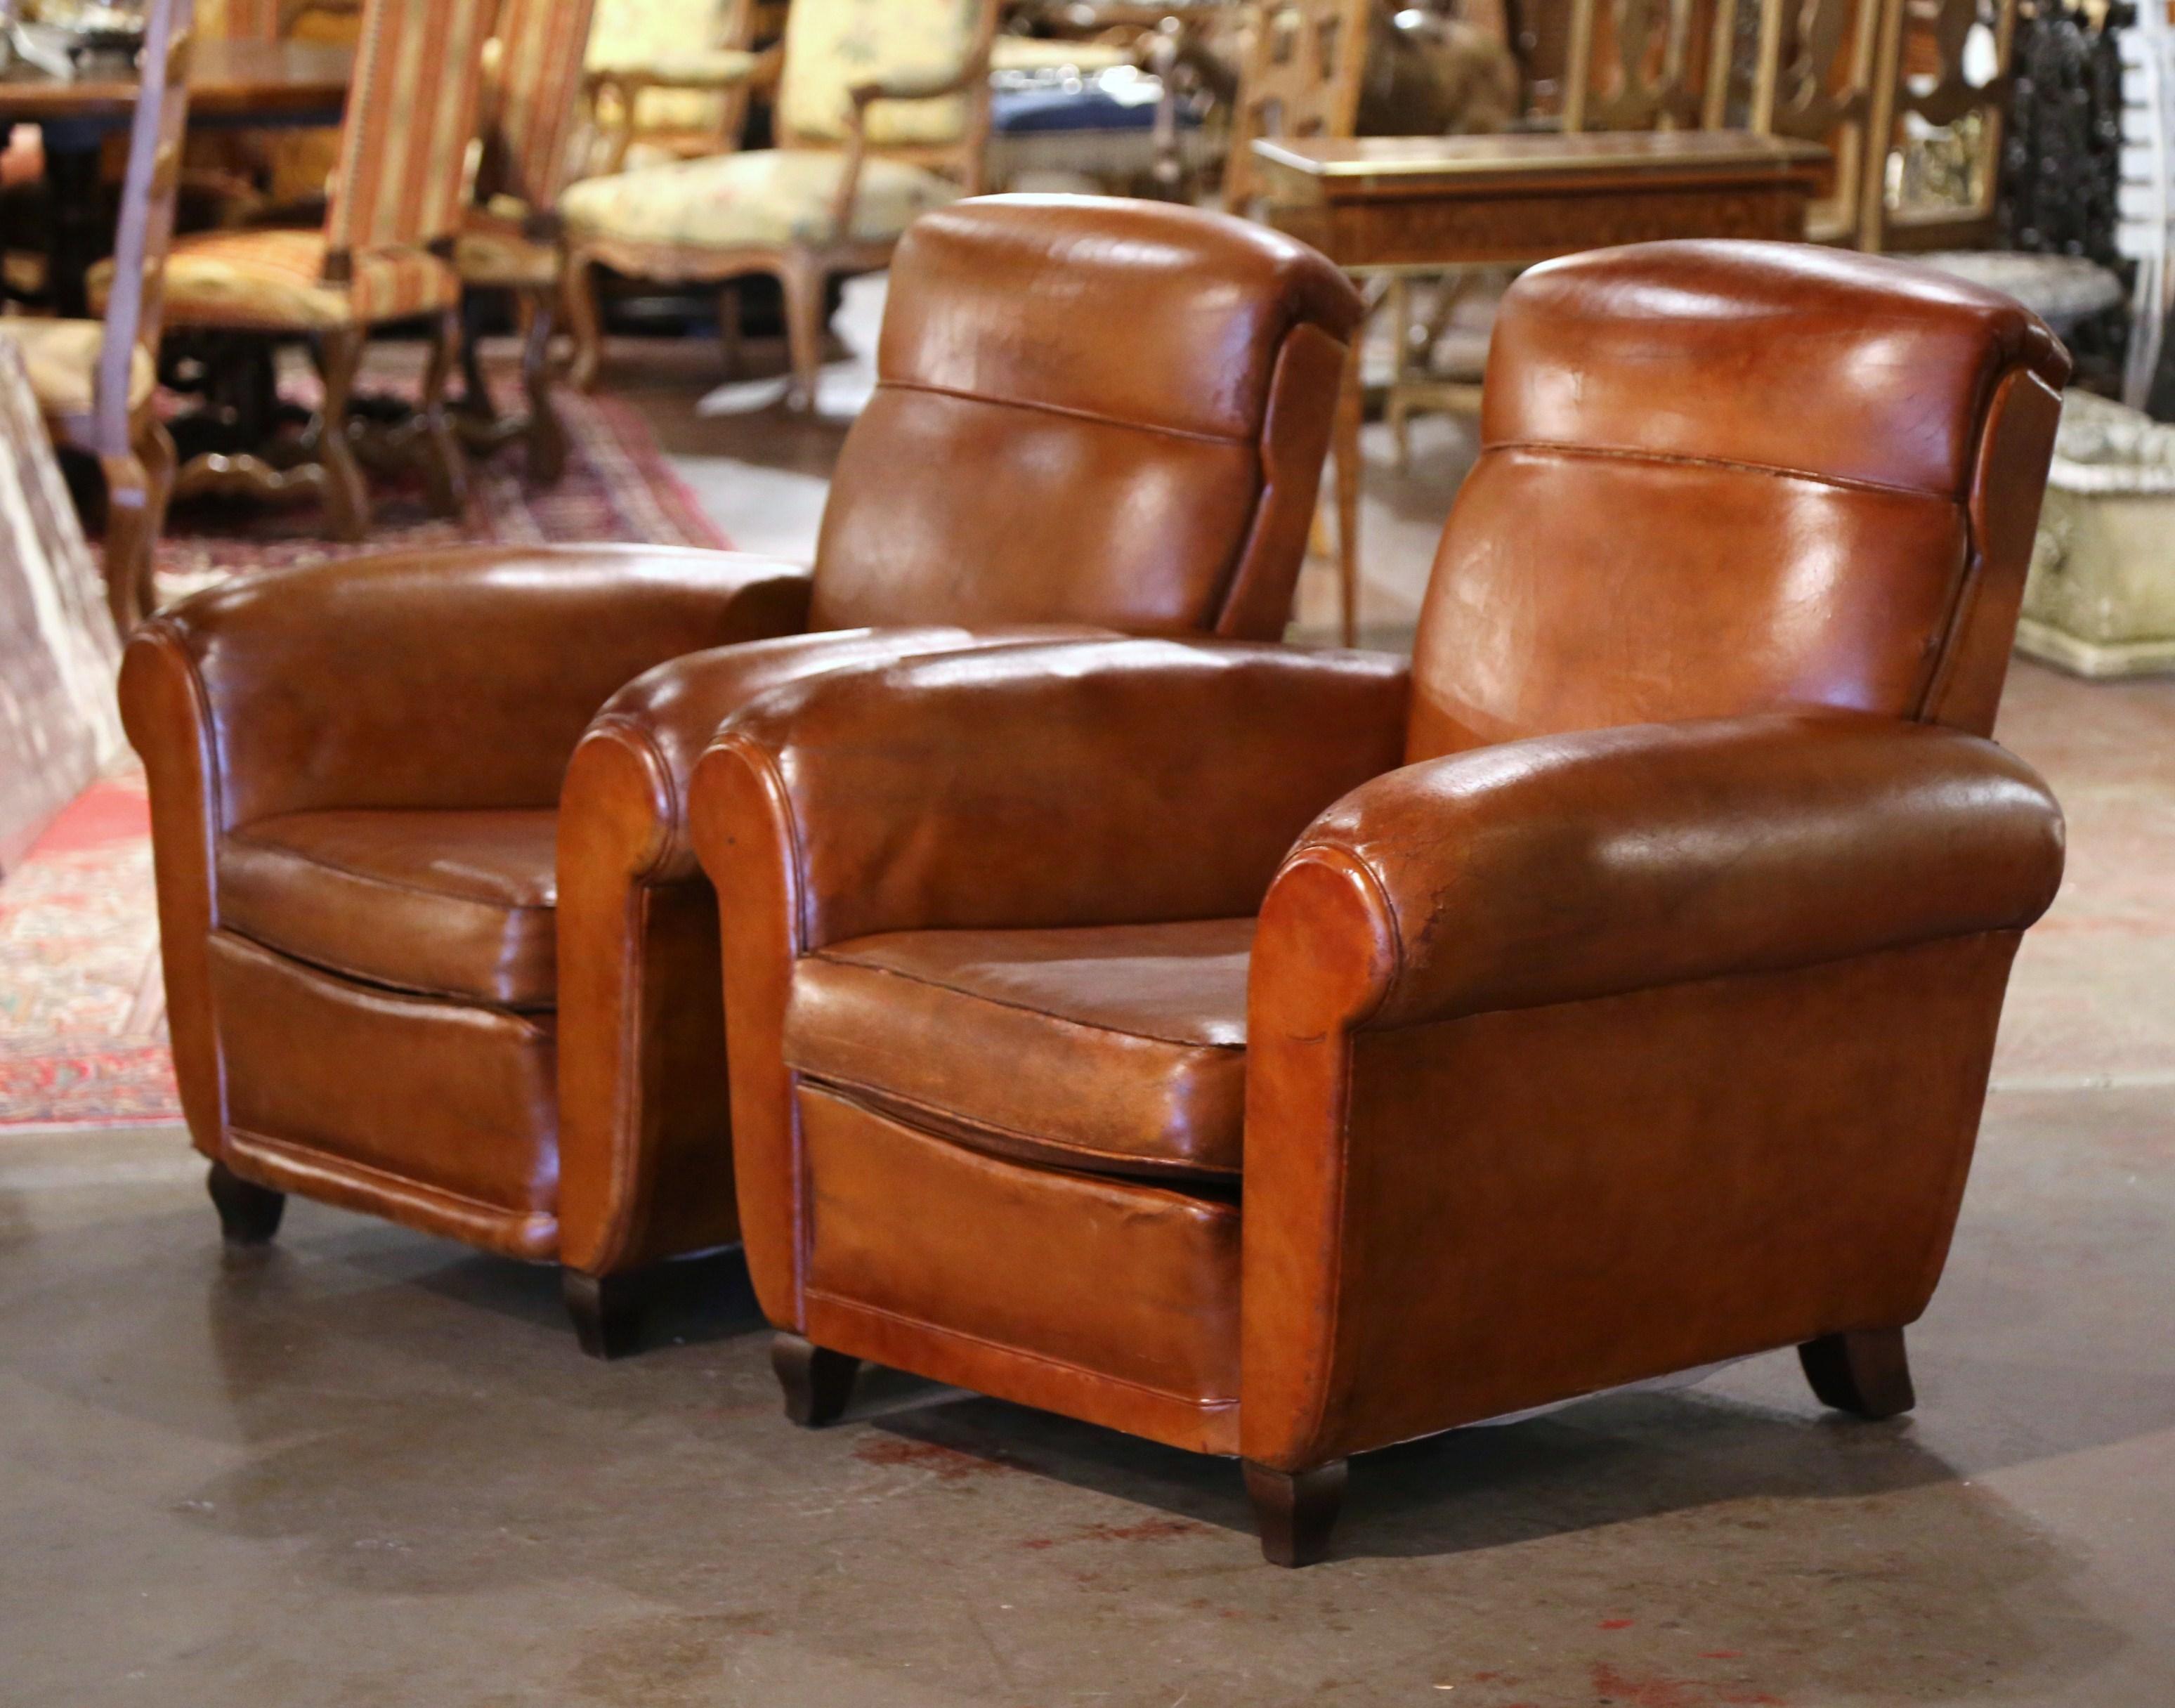 Pair of 1920s French Art Deco Club Armchairs with Original Brown Leather In Fair Condition For Sale In Dallas, TX